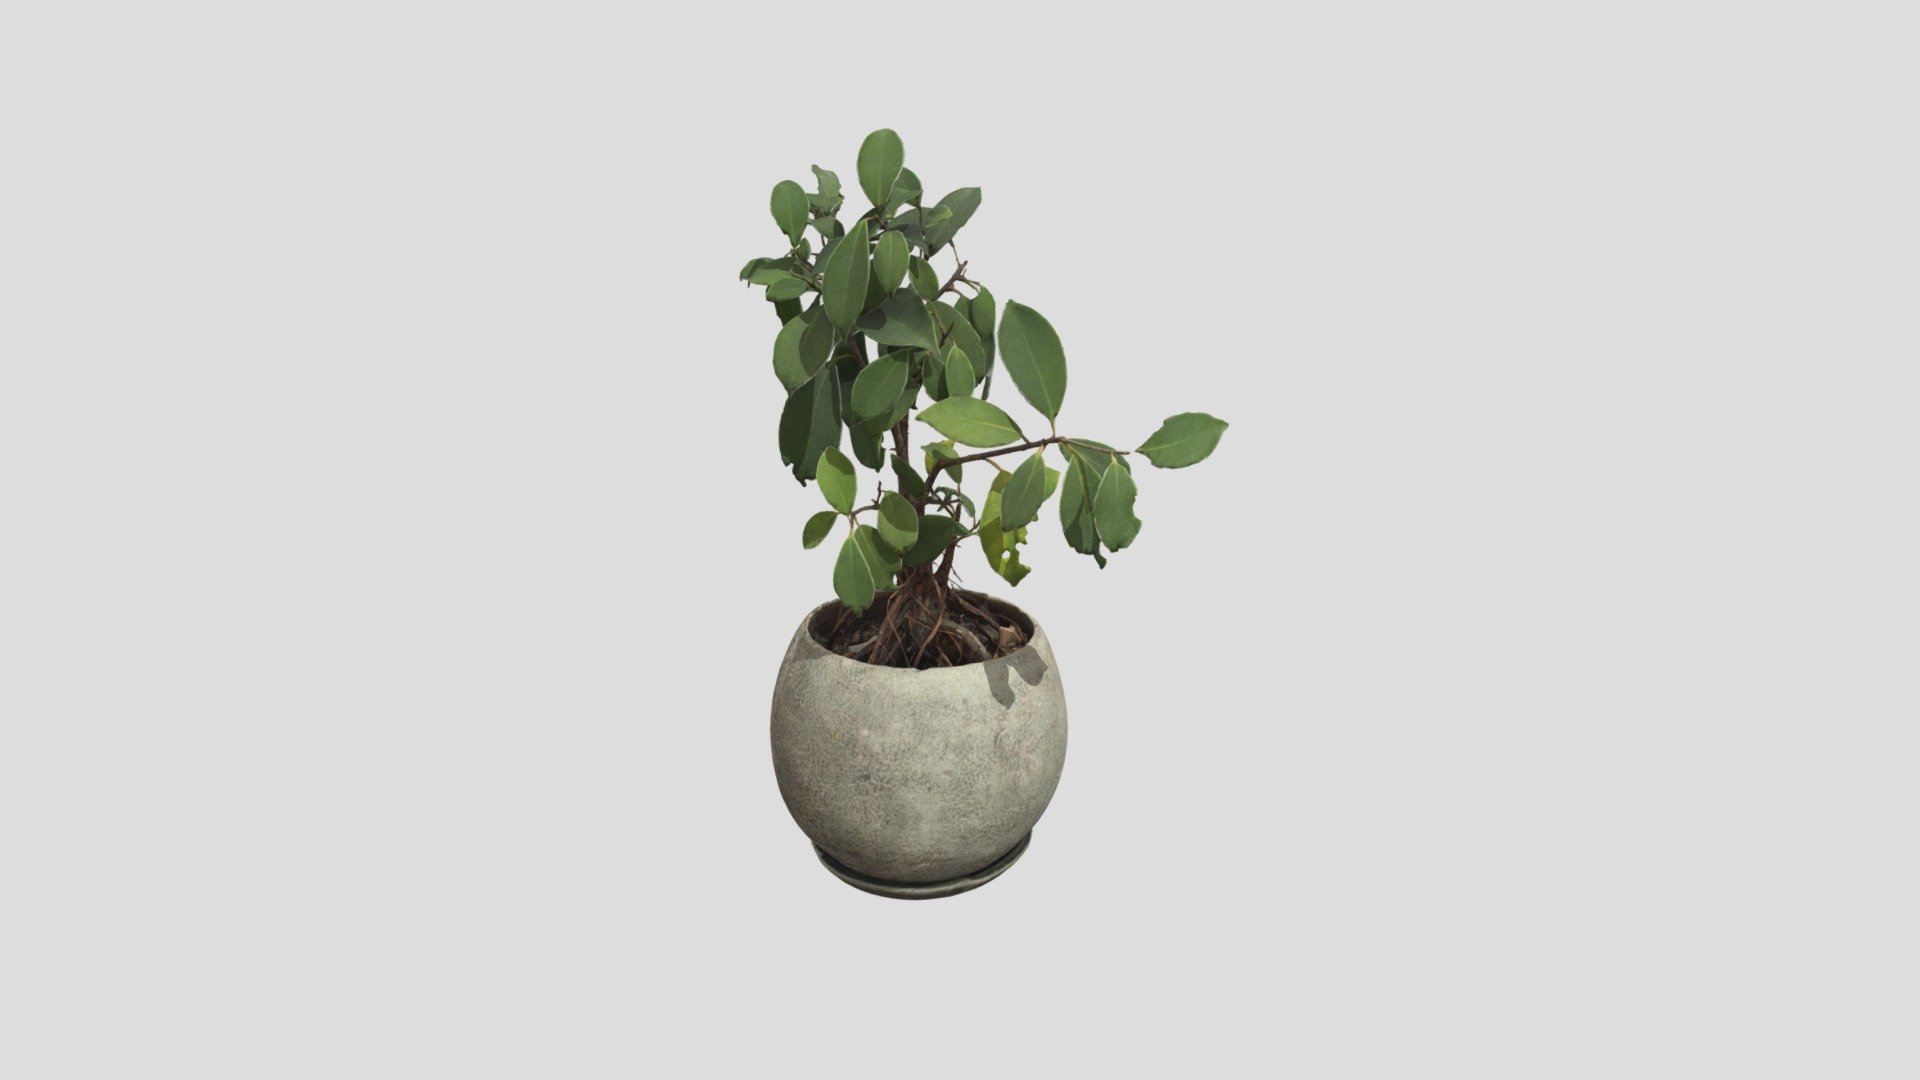 3D model of a planted tree.
Created by photogrammetry 3d model